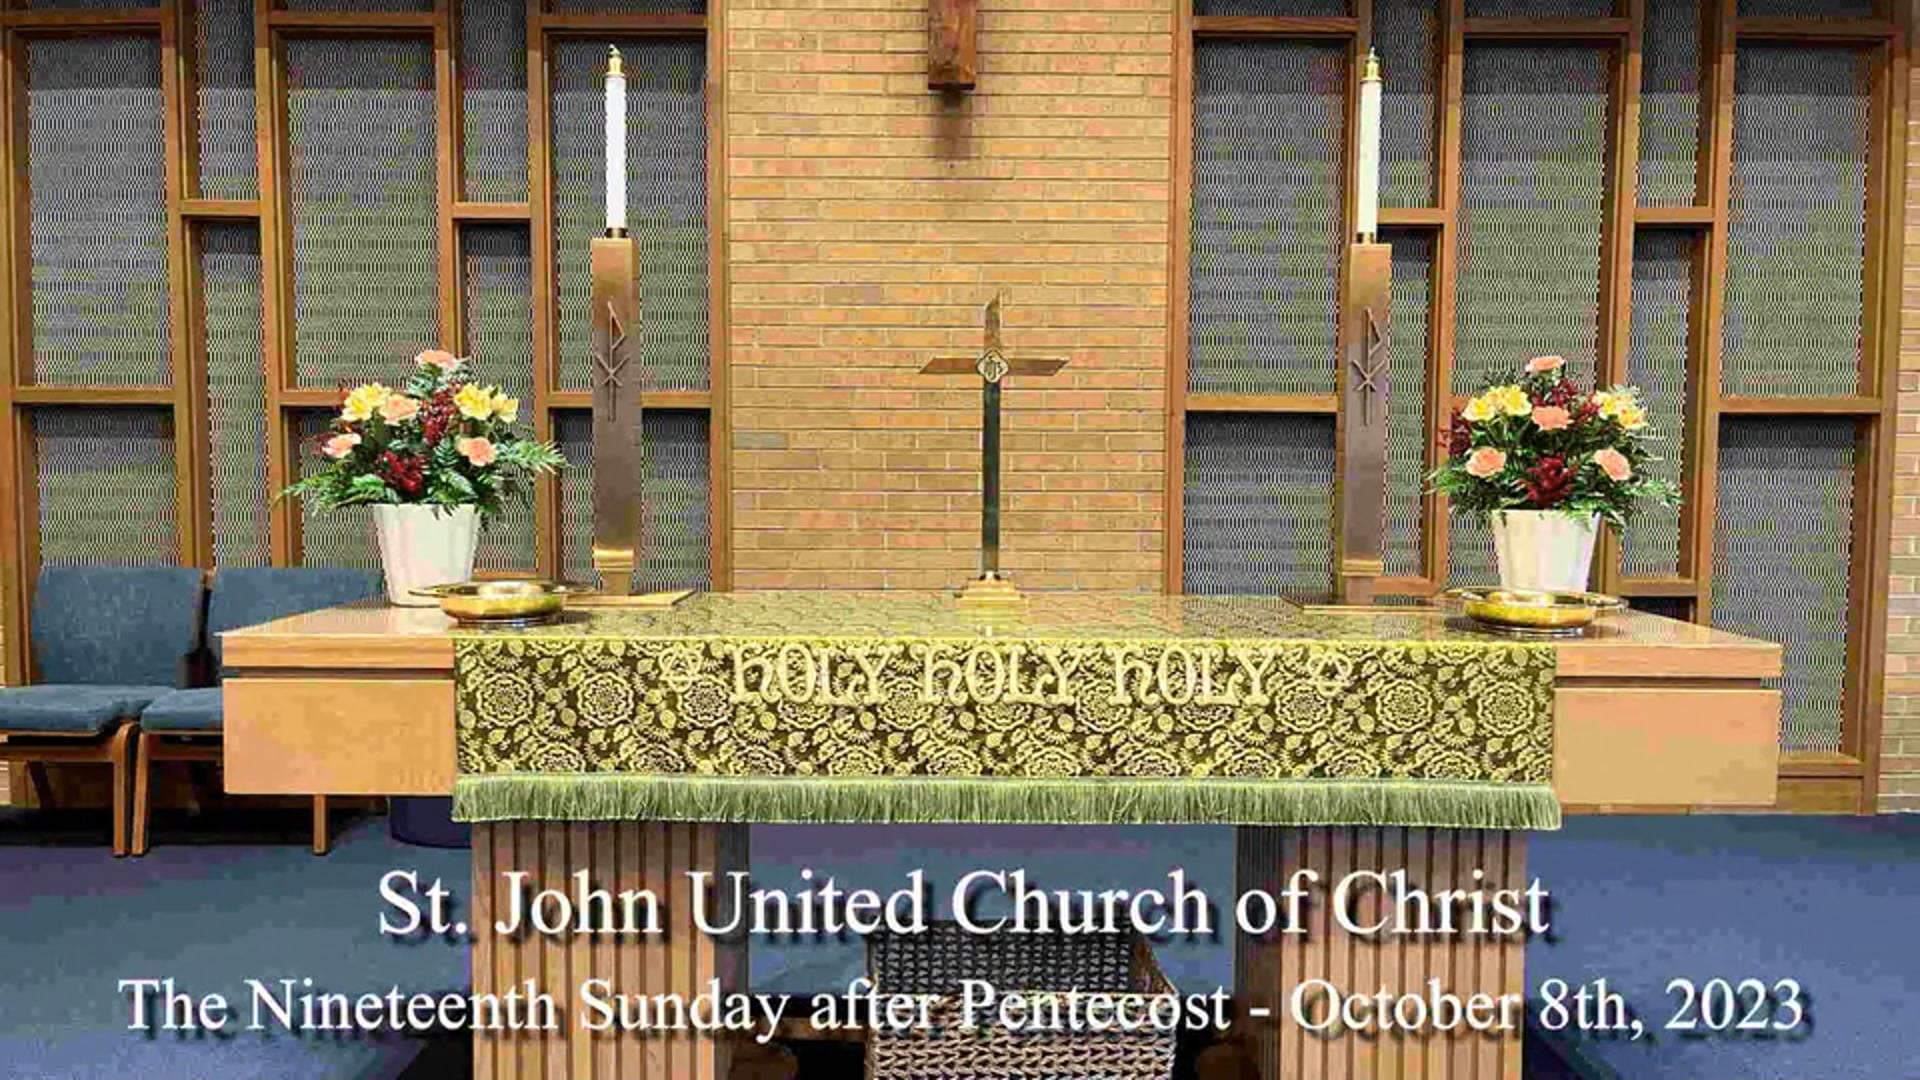 The Nineteenth Sunday after Pentecost - October 8th, 2023